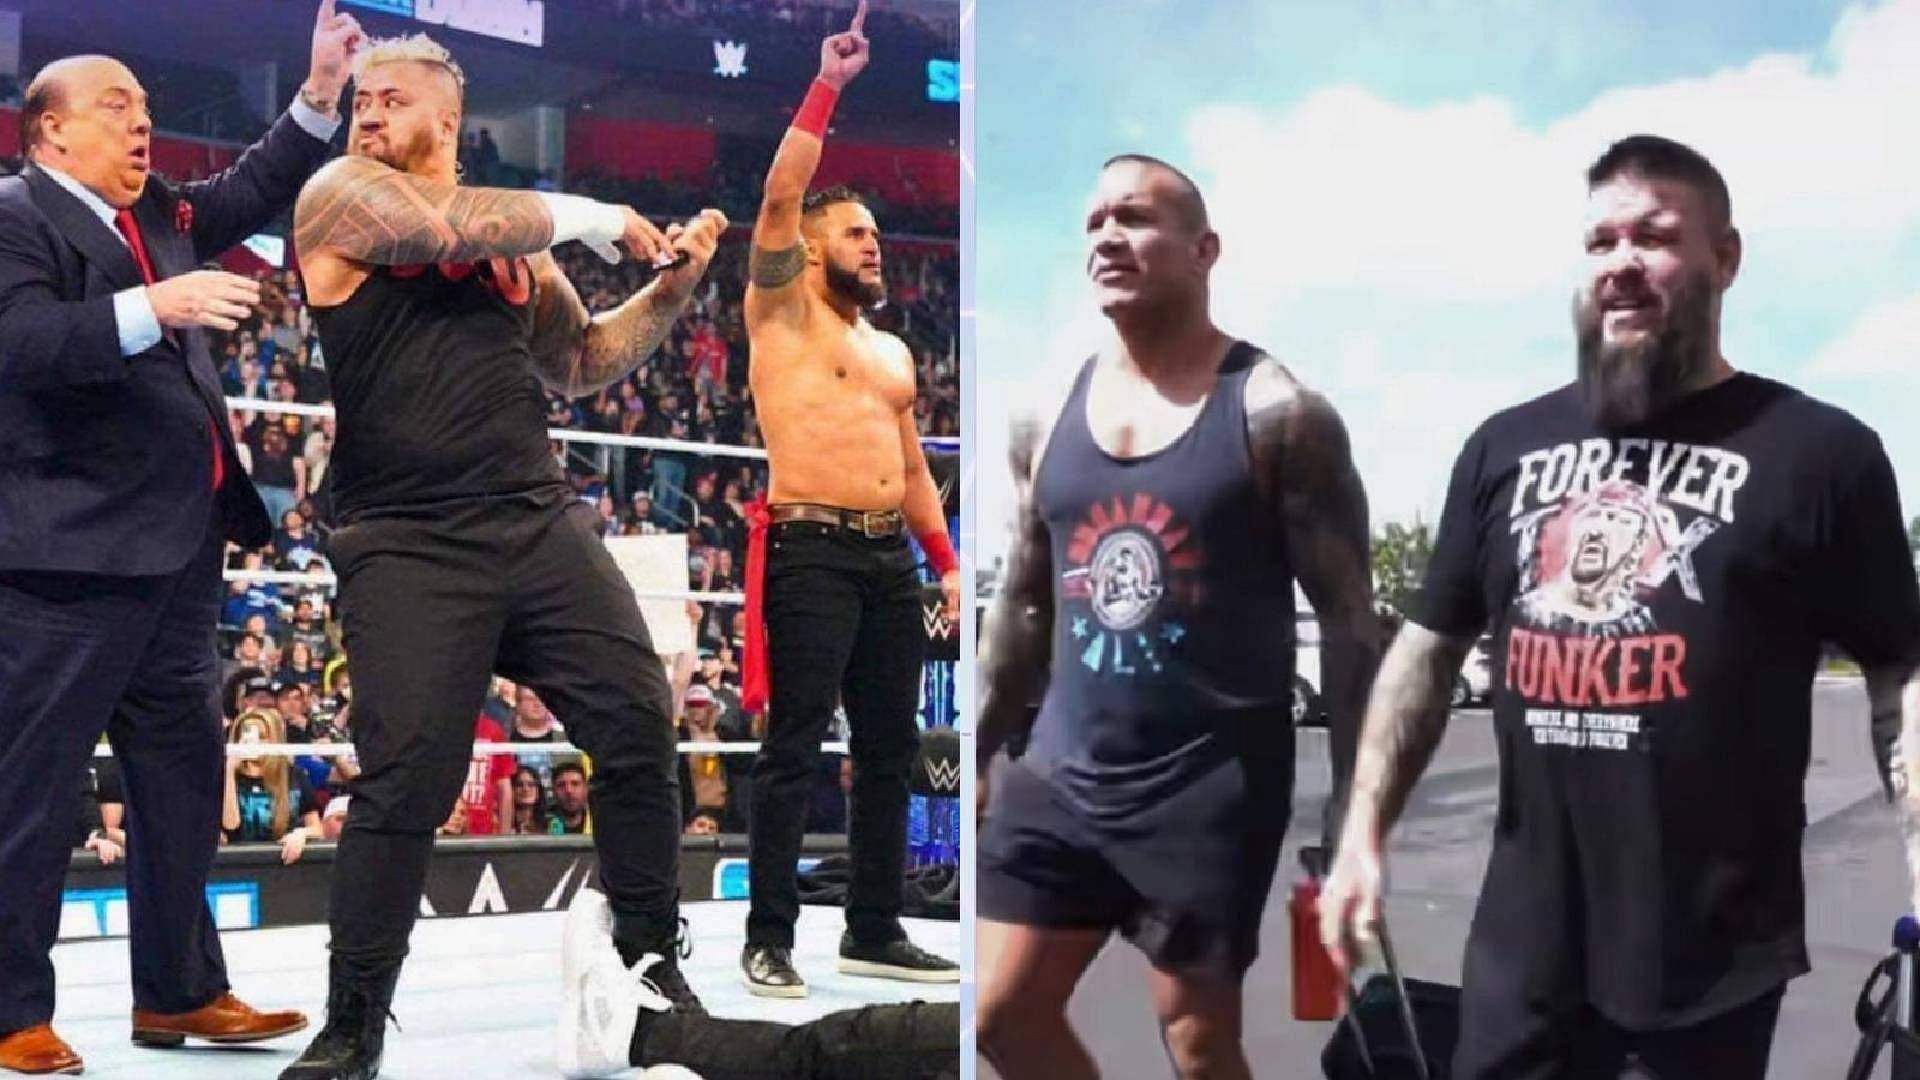 Bloodline member begs Randy Orton and Kevin Owens to pull out of match